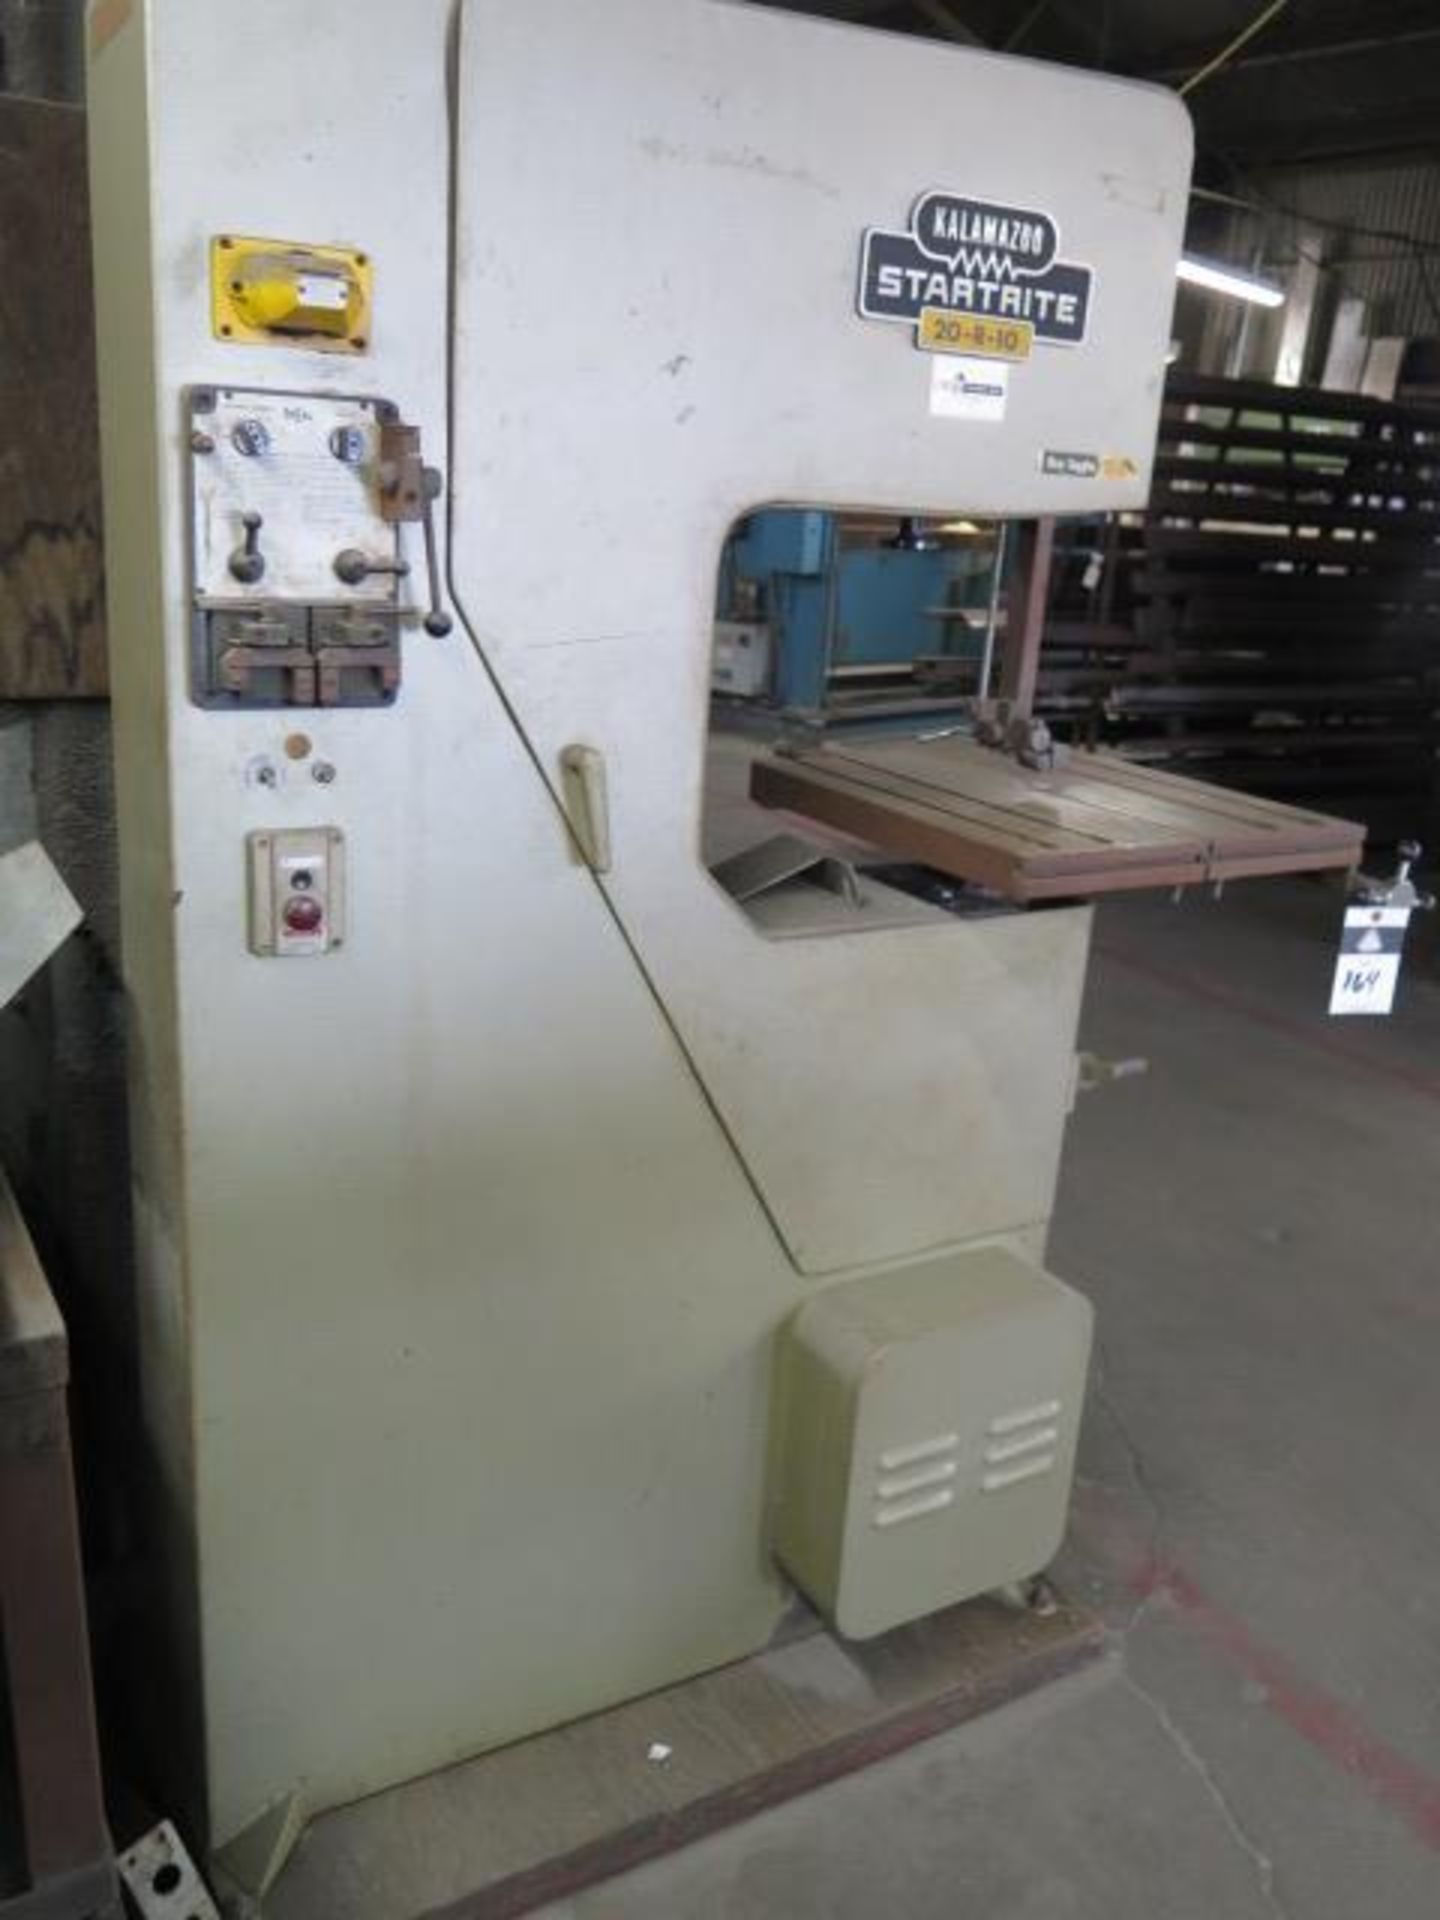 Kalamazoo Startrite 20-R-10 20" Vertical Band Saw w/ Blade Welder (SOLD AS-IS - NO WARRANTY) - Image 3 of 9